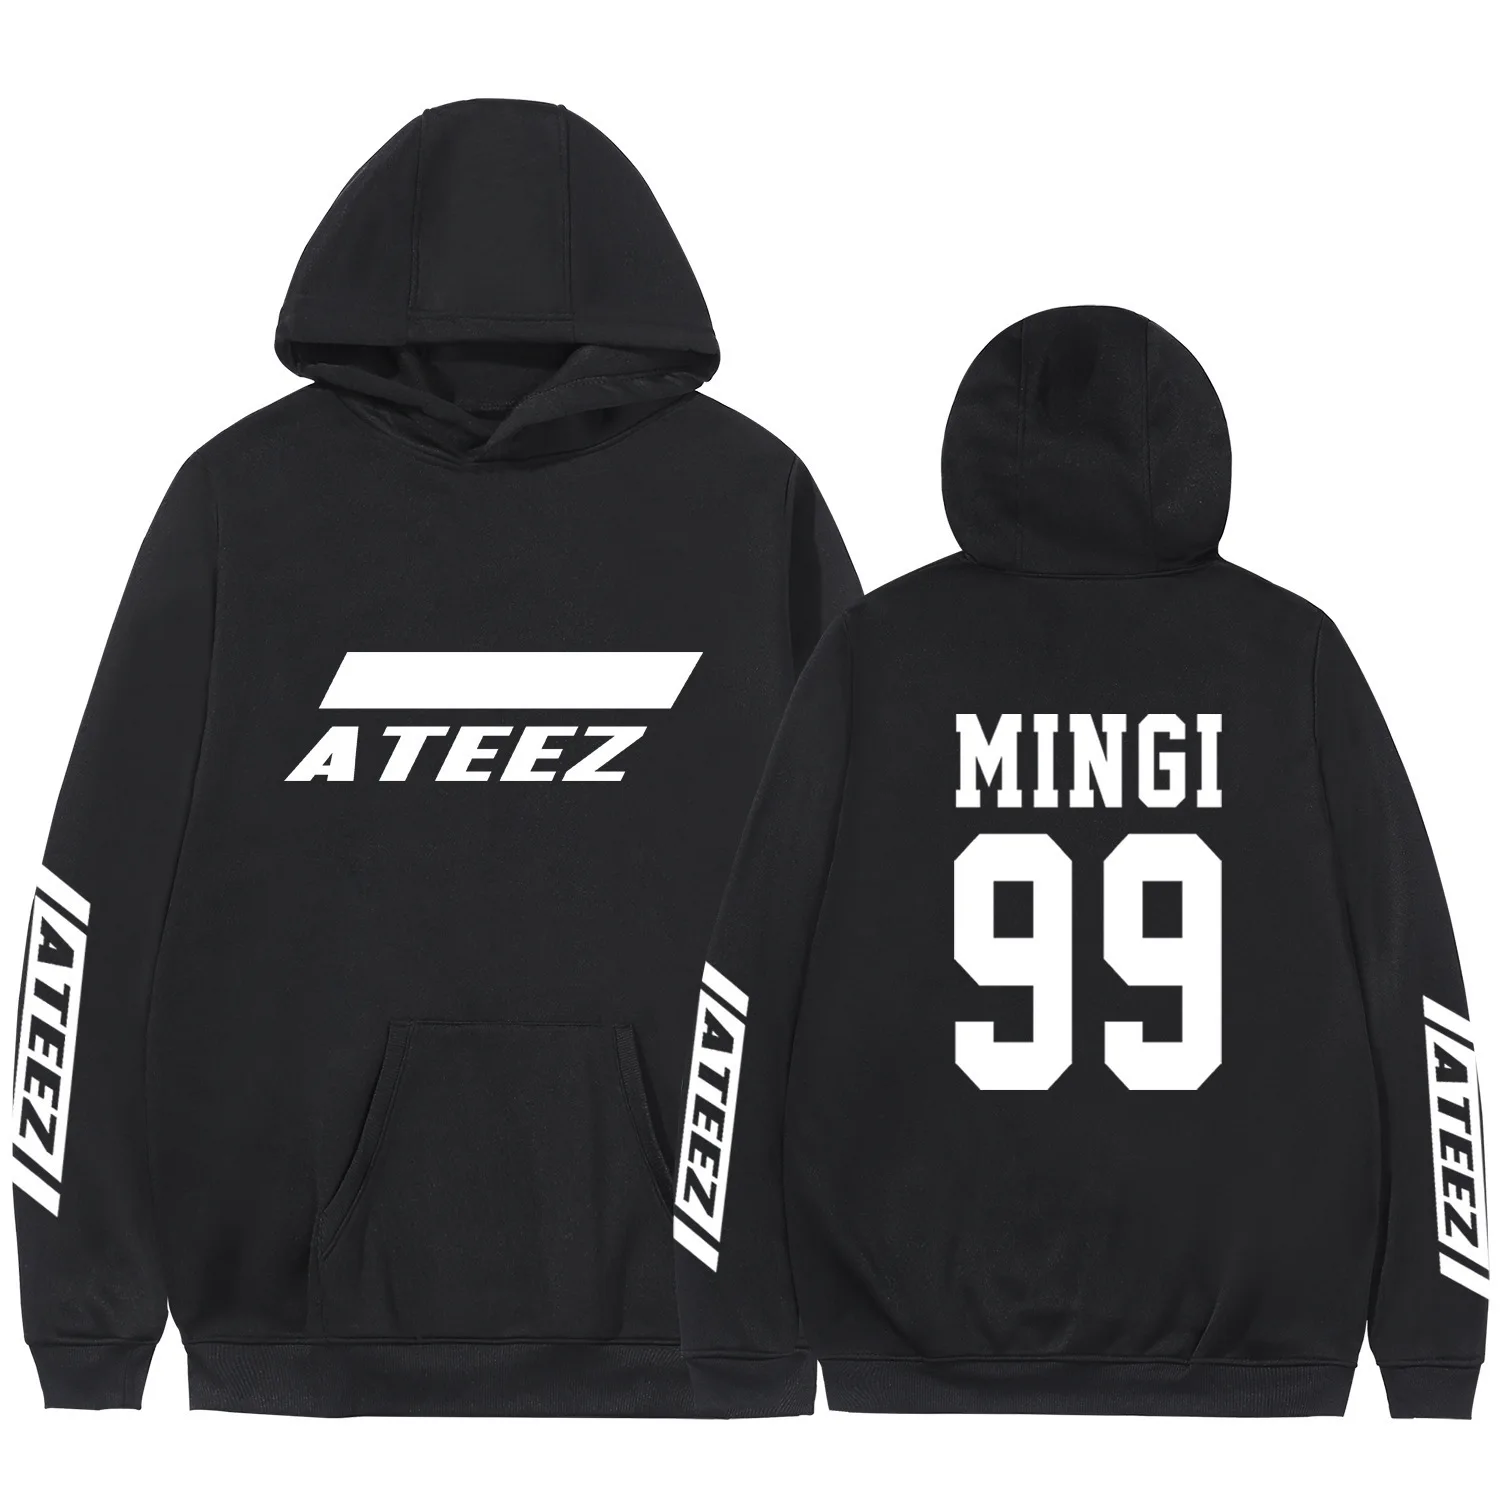 Ateez Sweatshirts (Official Collection)